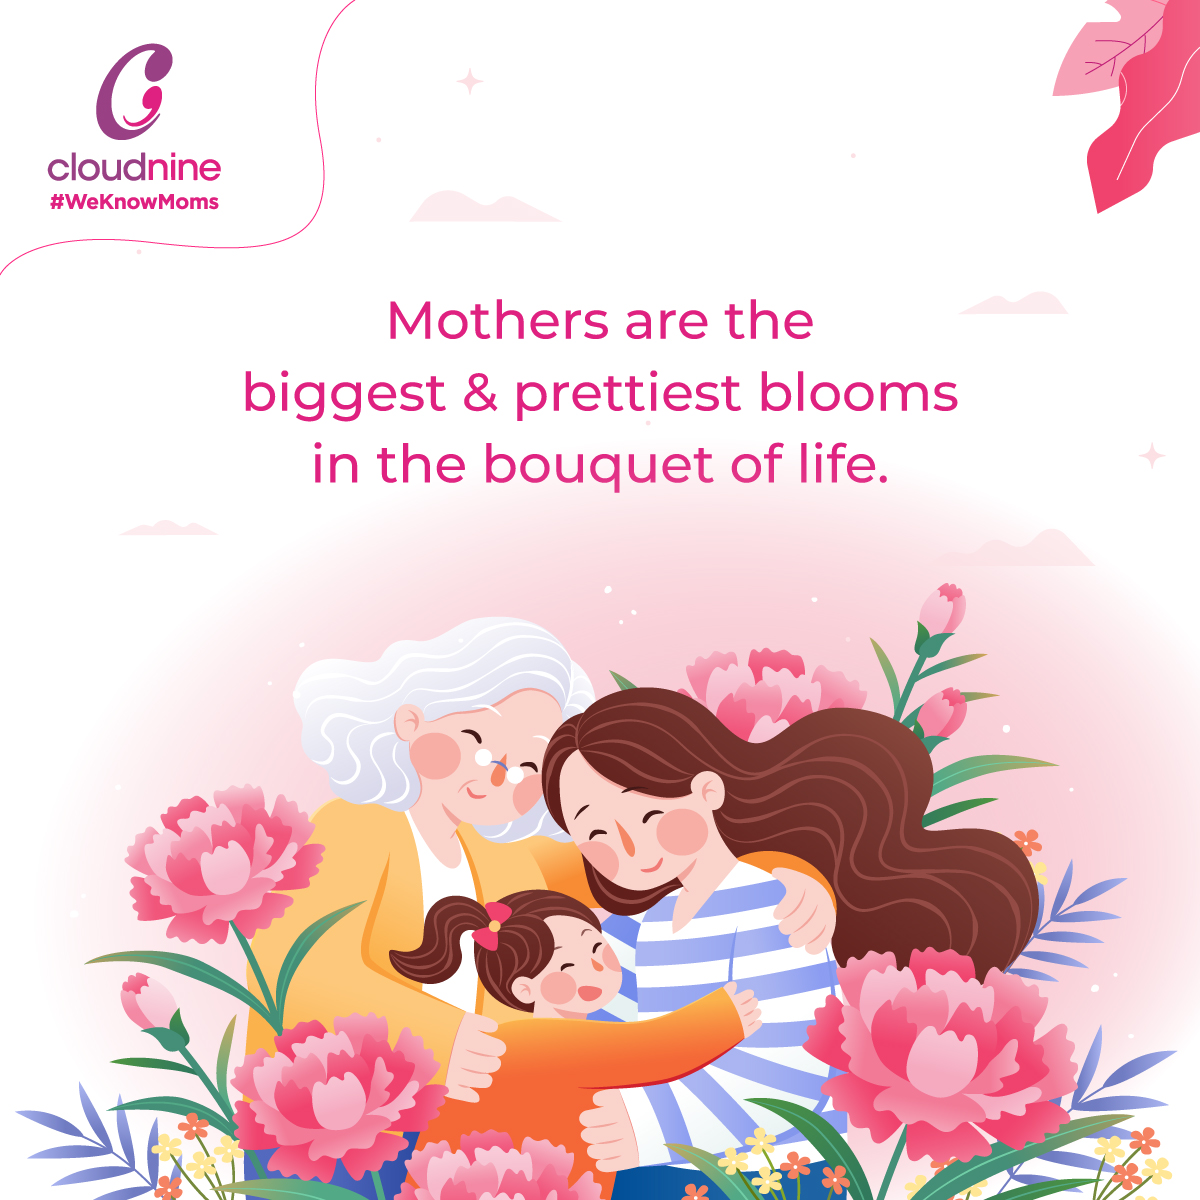 🤱Mothers are like the most magnificent and vibrant flowers in a garden. They are the foundation of a family and the ones who bring warmth, comfort and joy into our lives.👩‍👧‍👦 Drop a ❤️ if you agree and share it with your loved ones. #Weknowmoms #oncloudnine #motherlove #MomLife